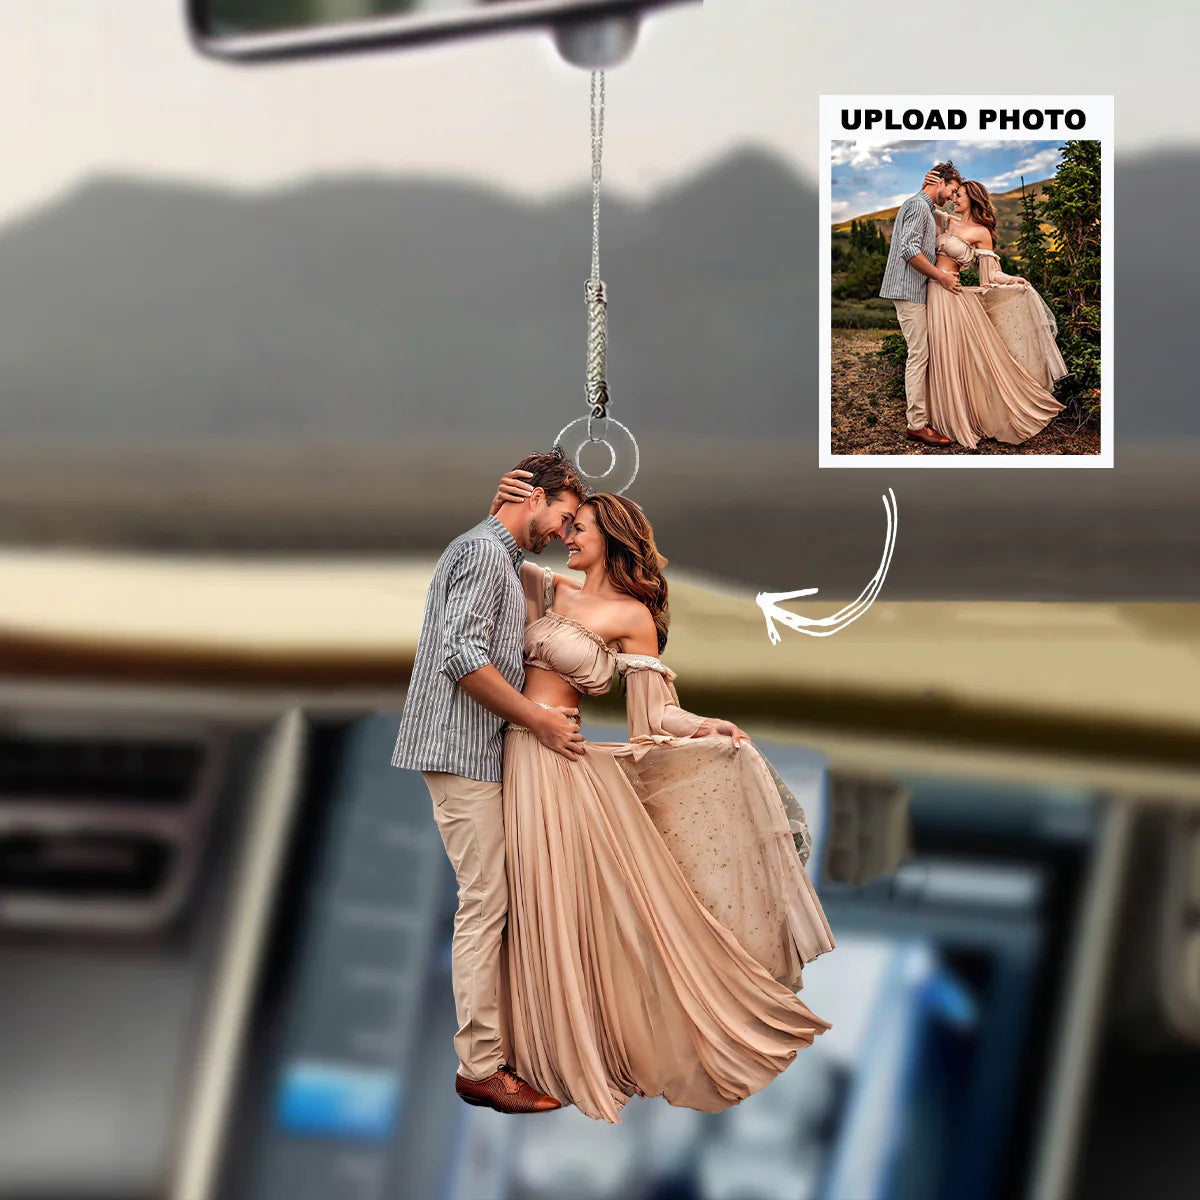 Happy Valentine‘s Day-Personalized Couple Upload Photo Hanging Ornament